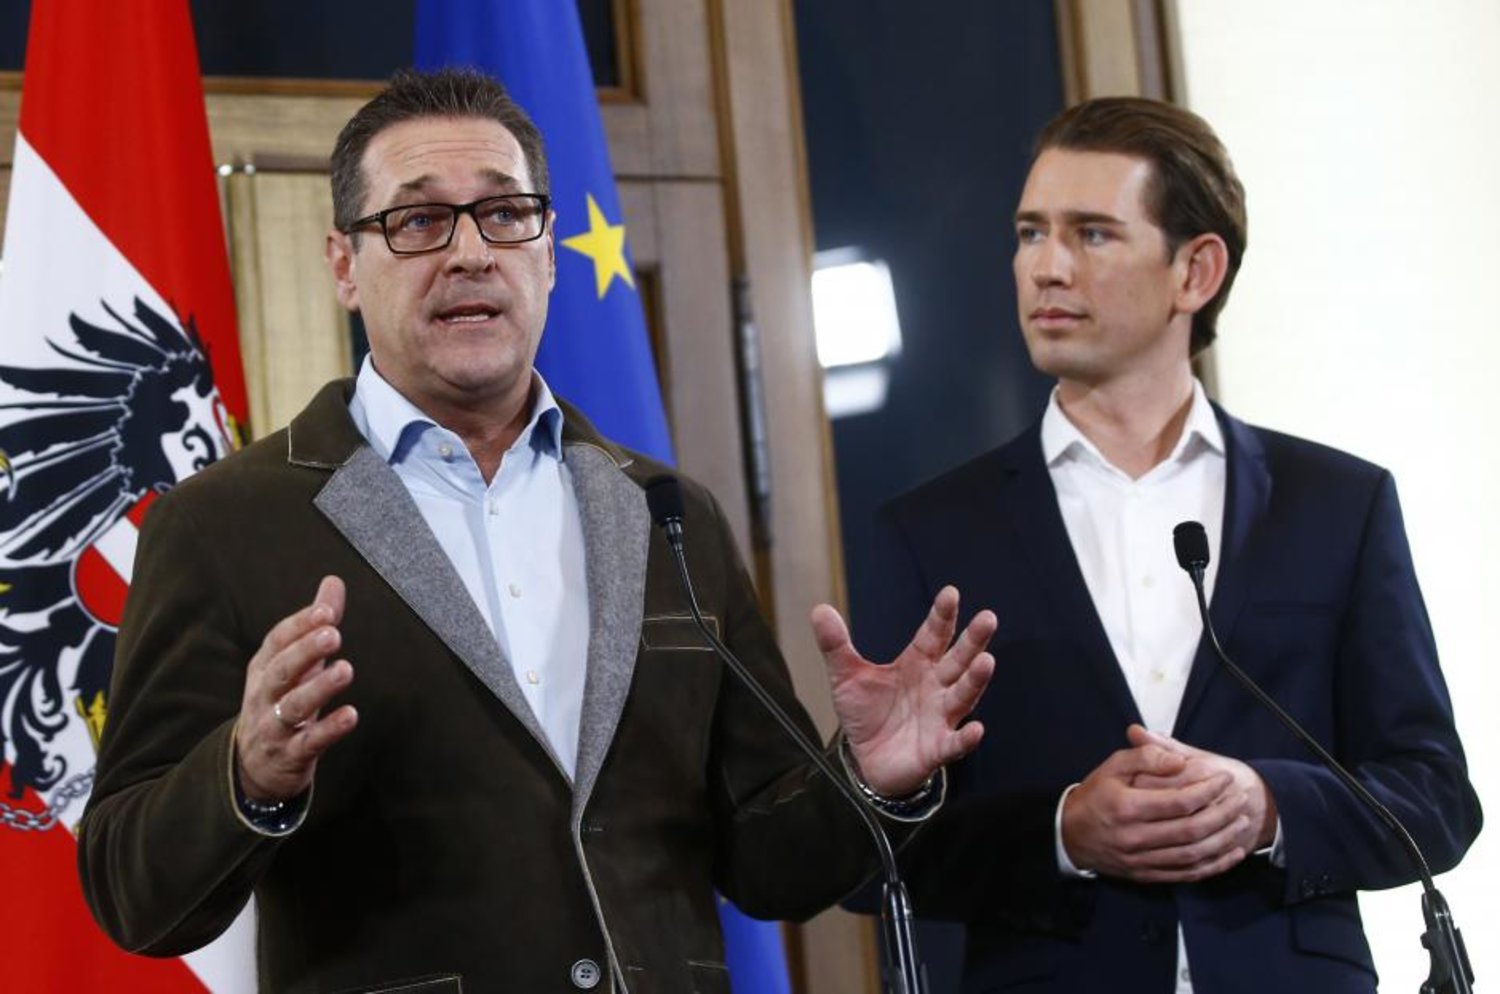 Head of the Freedom Party Heinz-Christian Strache (L) and head of the People's Party Sebastian Kurz address a news conference in Vienna, Austria, December 15, 2017. (Reuters)